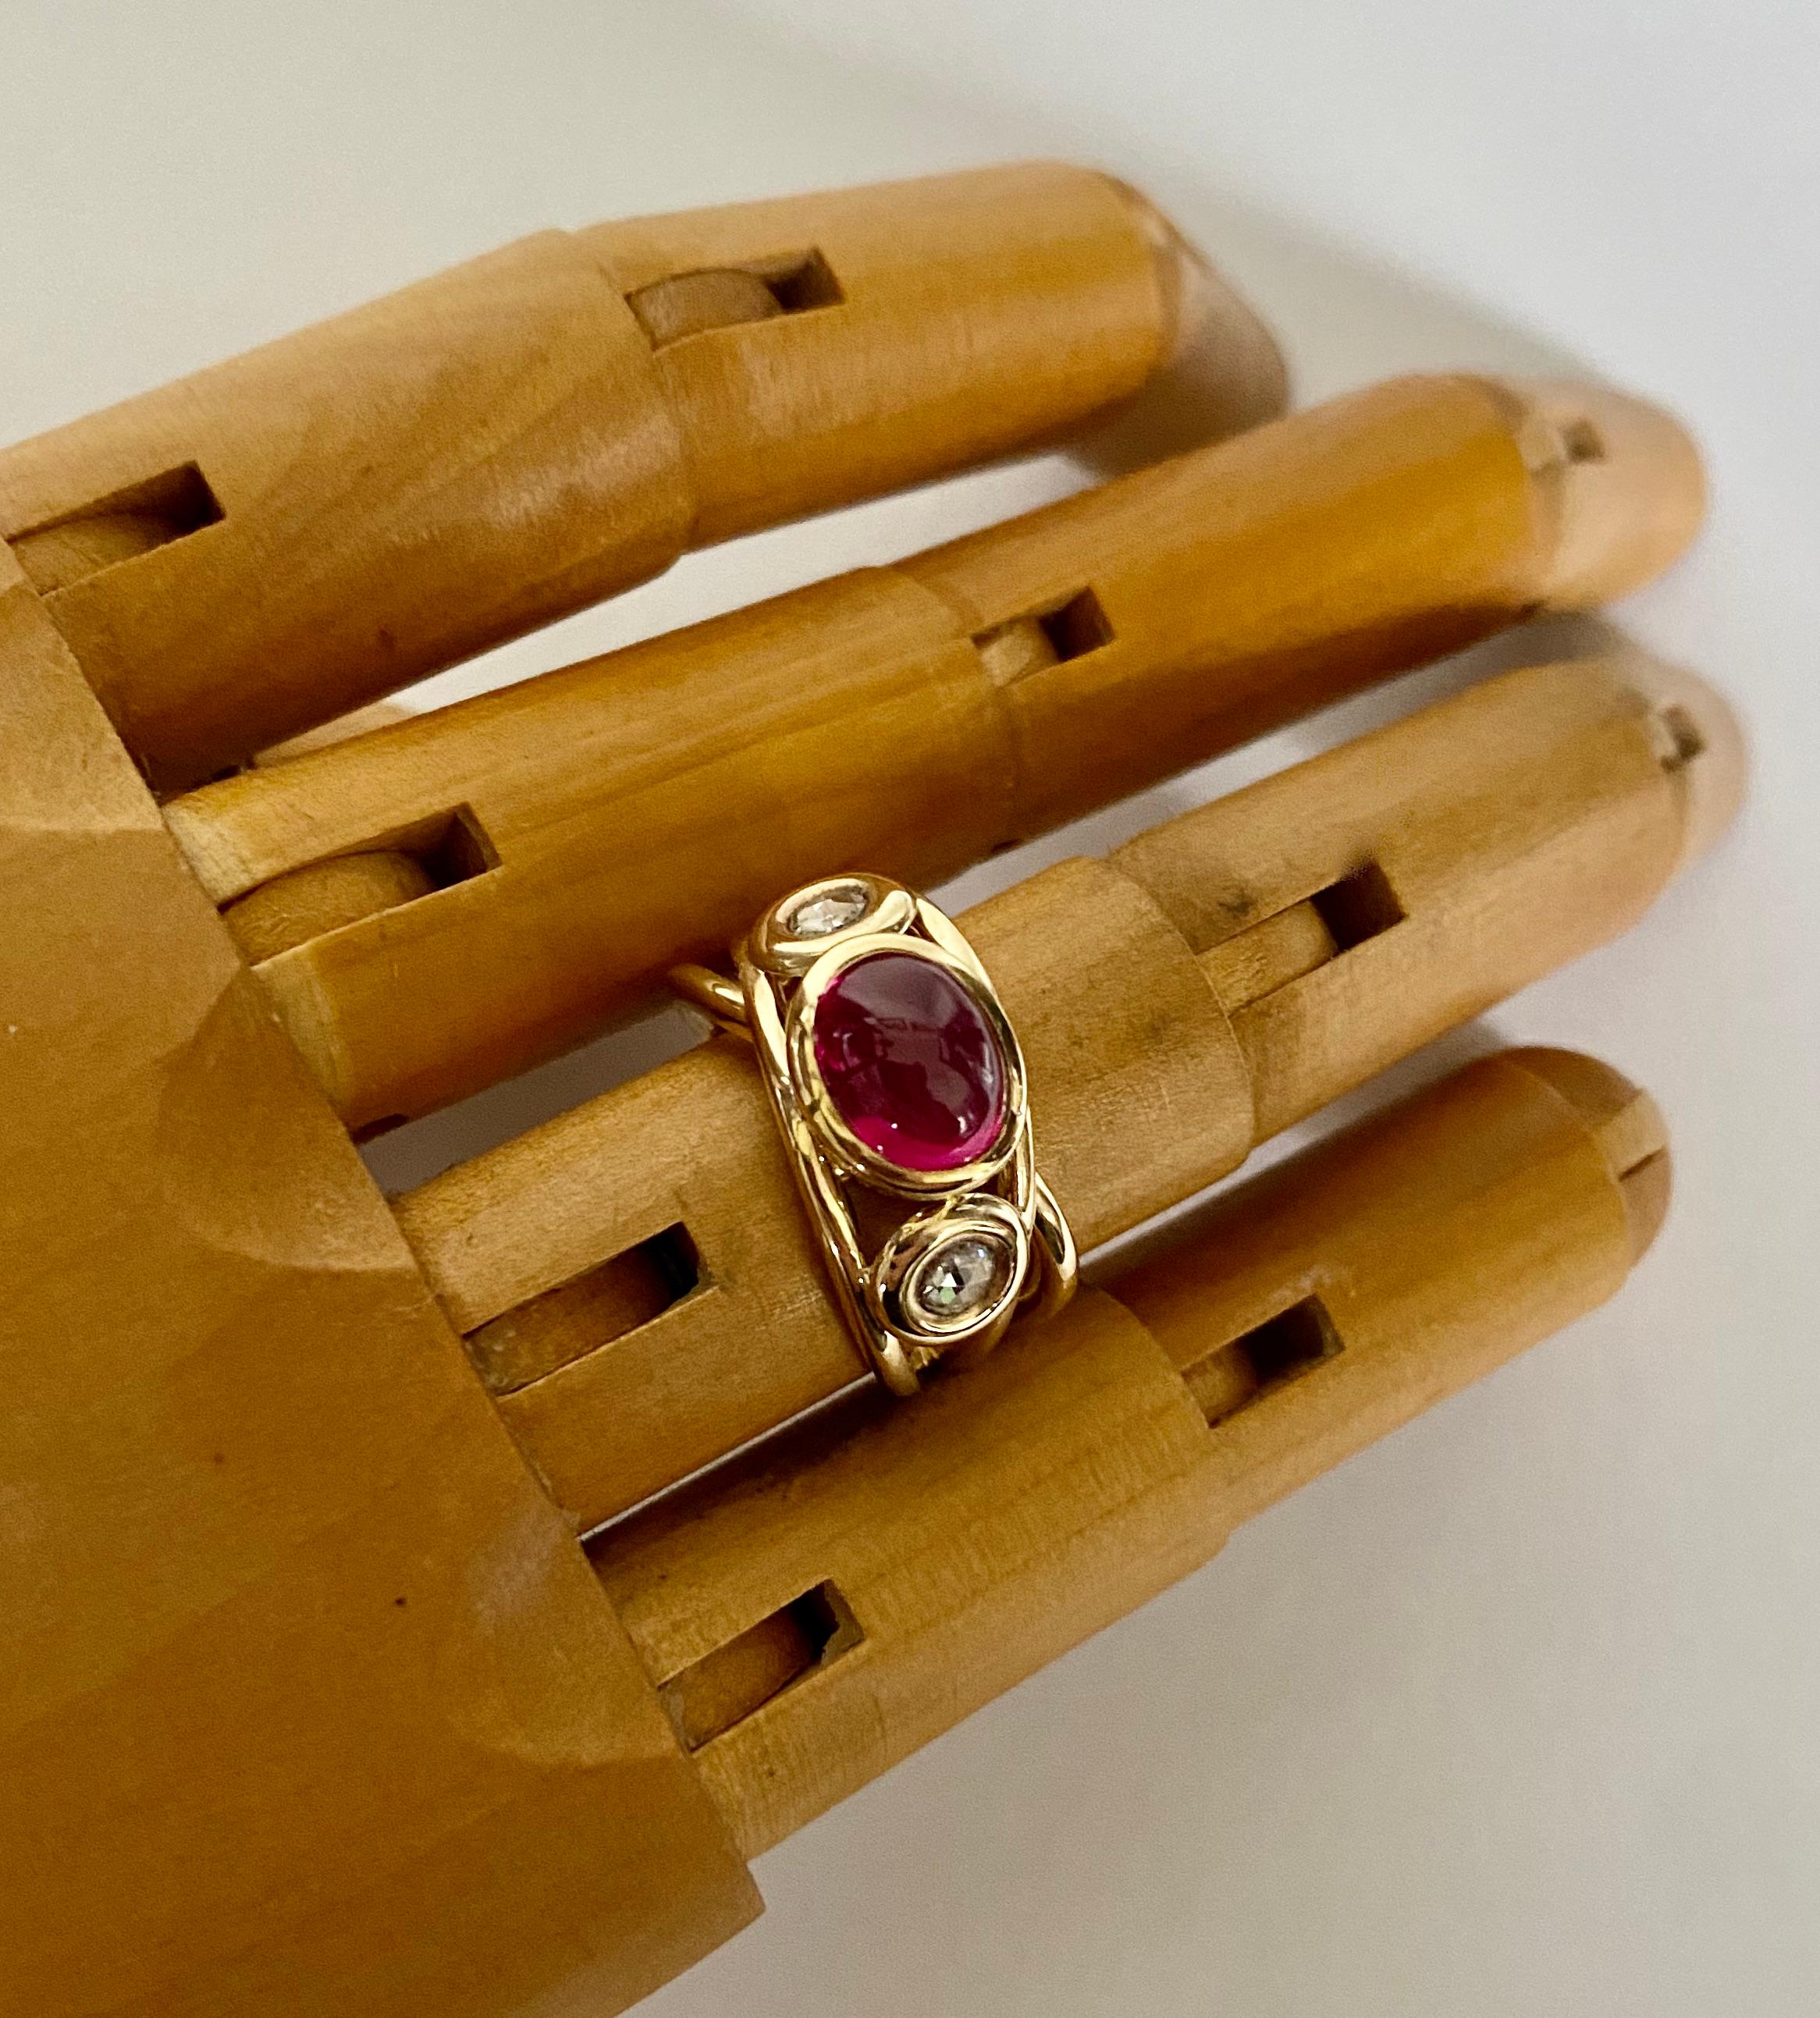 Cabochon ruby is featured in this open band ring.  The ruby possesses optimum color.  It is well cut and polished.  The gem also contains a surprise-a baby six point star.  The ruby is flanked by two rose cut diamonds. The hand fabricated 18k gold